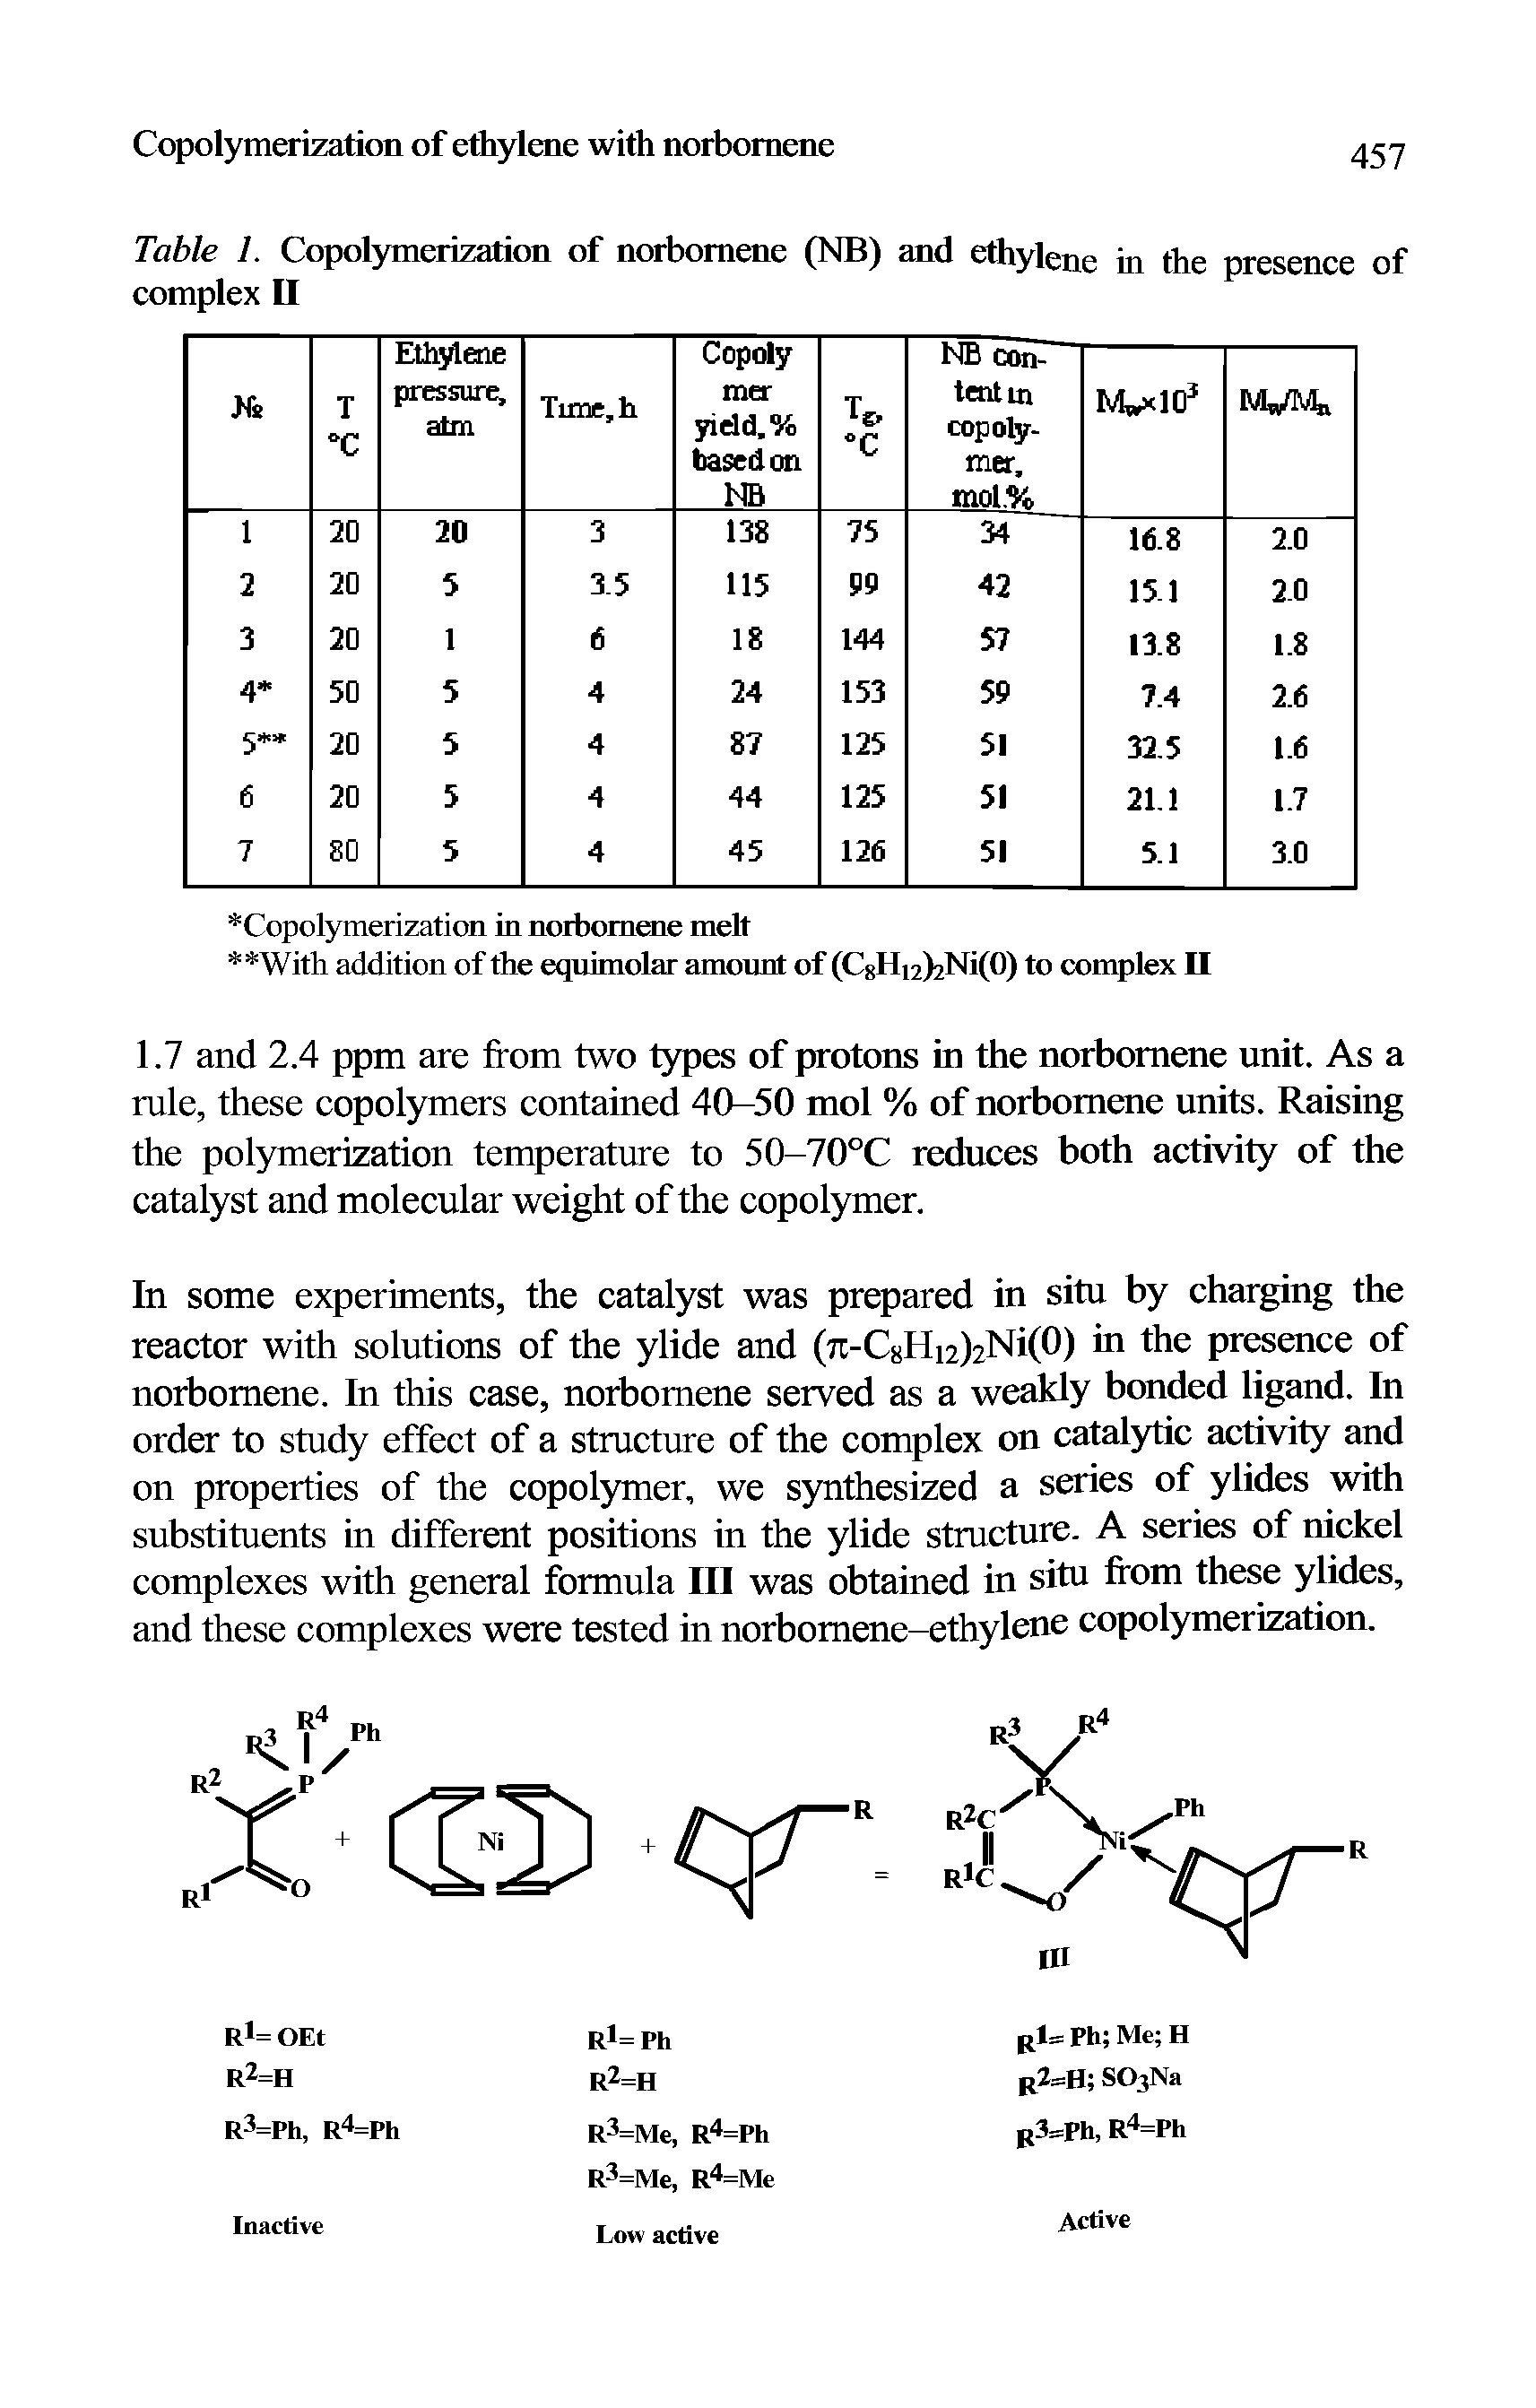 Table 1. Copolymerization of norbomene (NB) and ethylene in the presence of complex II...